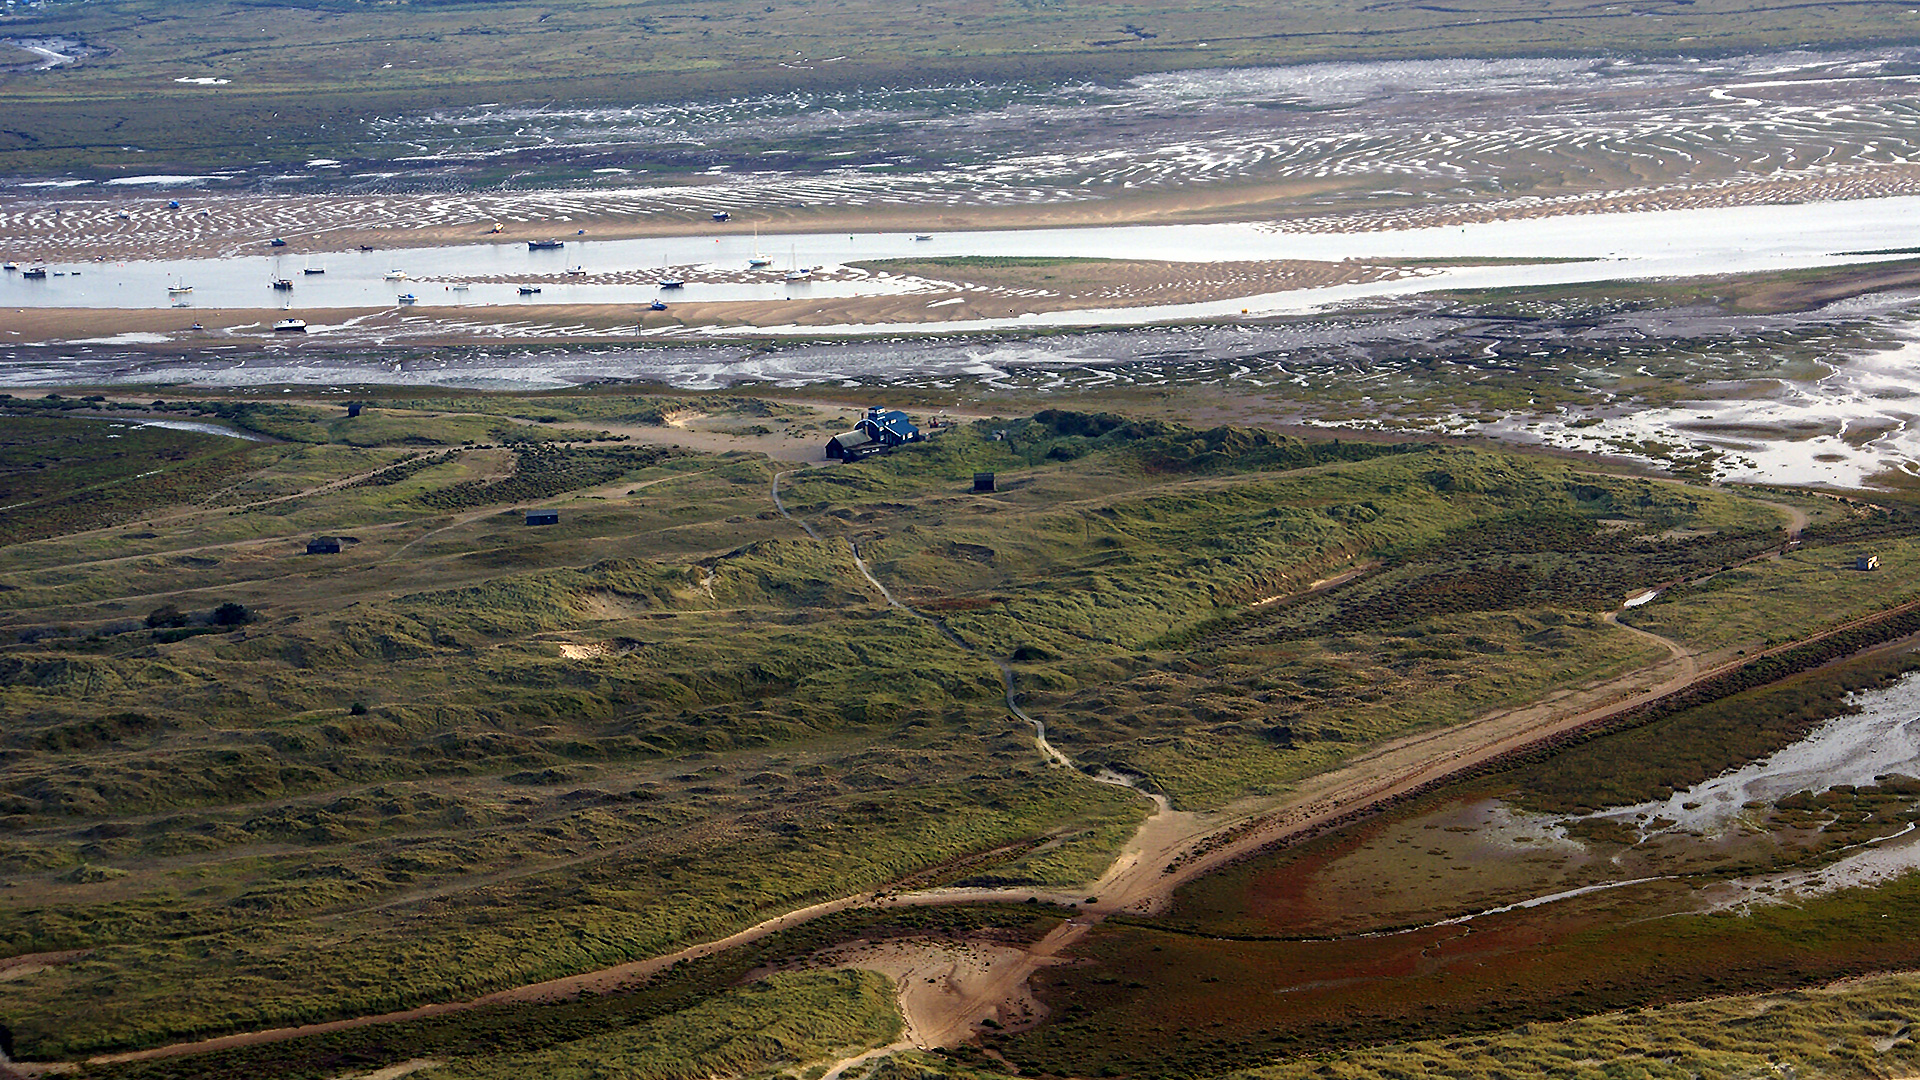 Aerial photo of Blakeney pit and the Lifeboat station